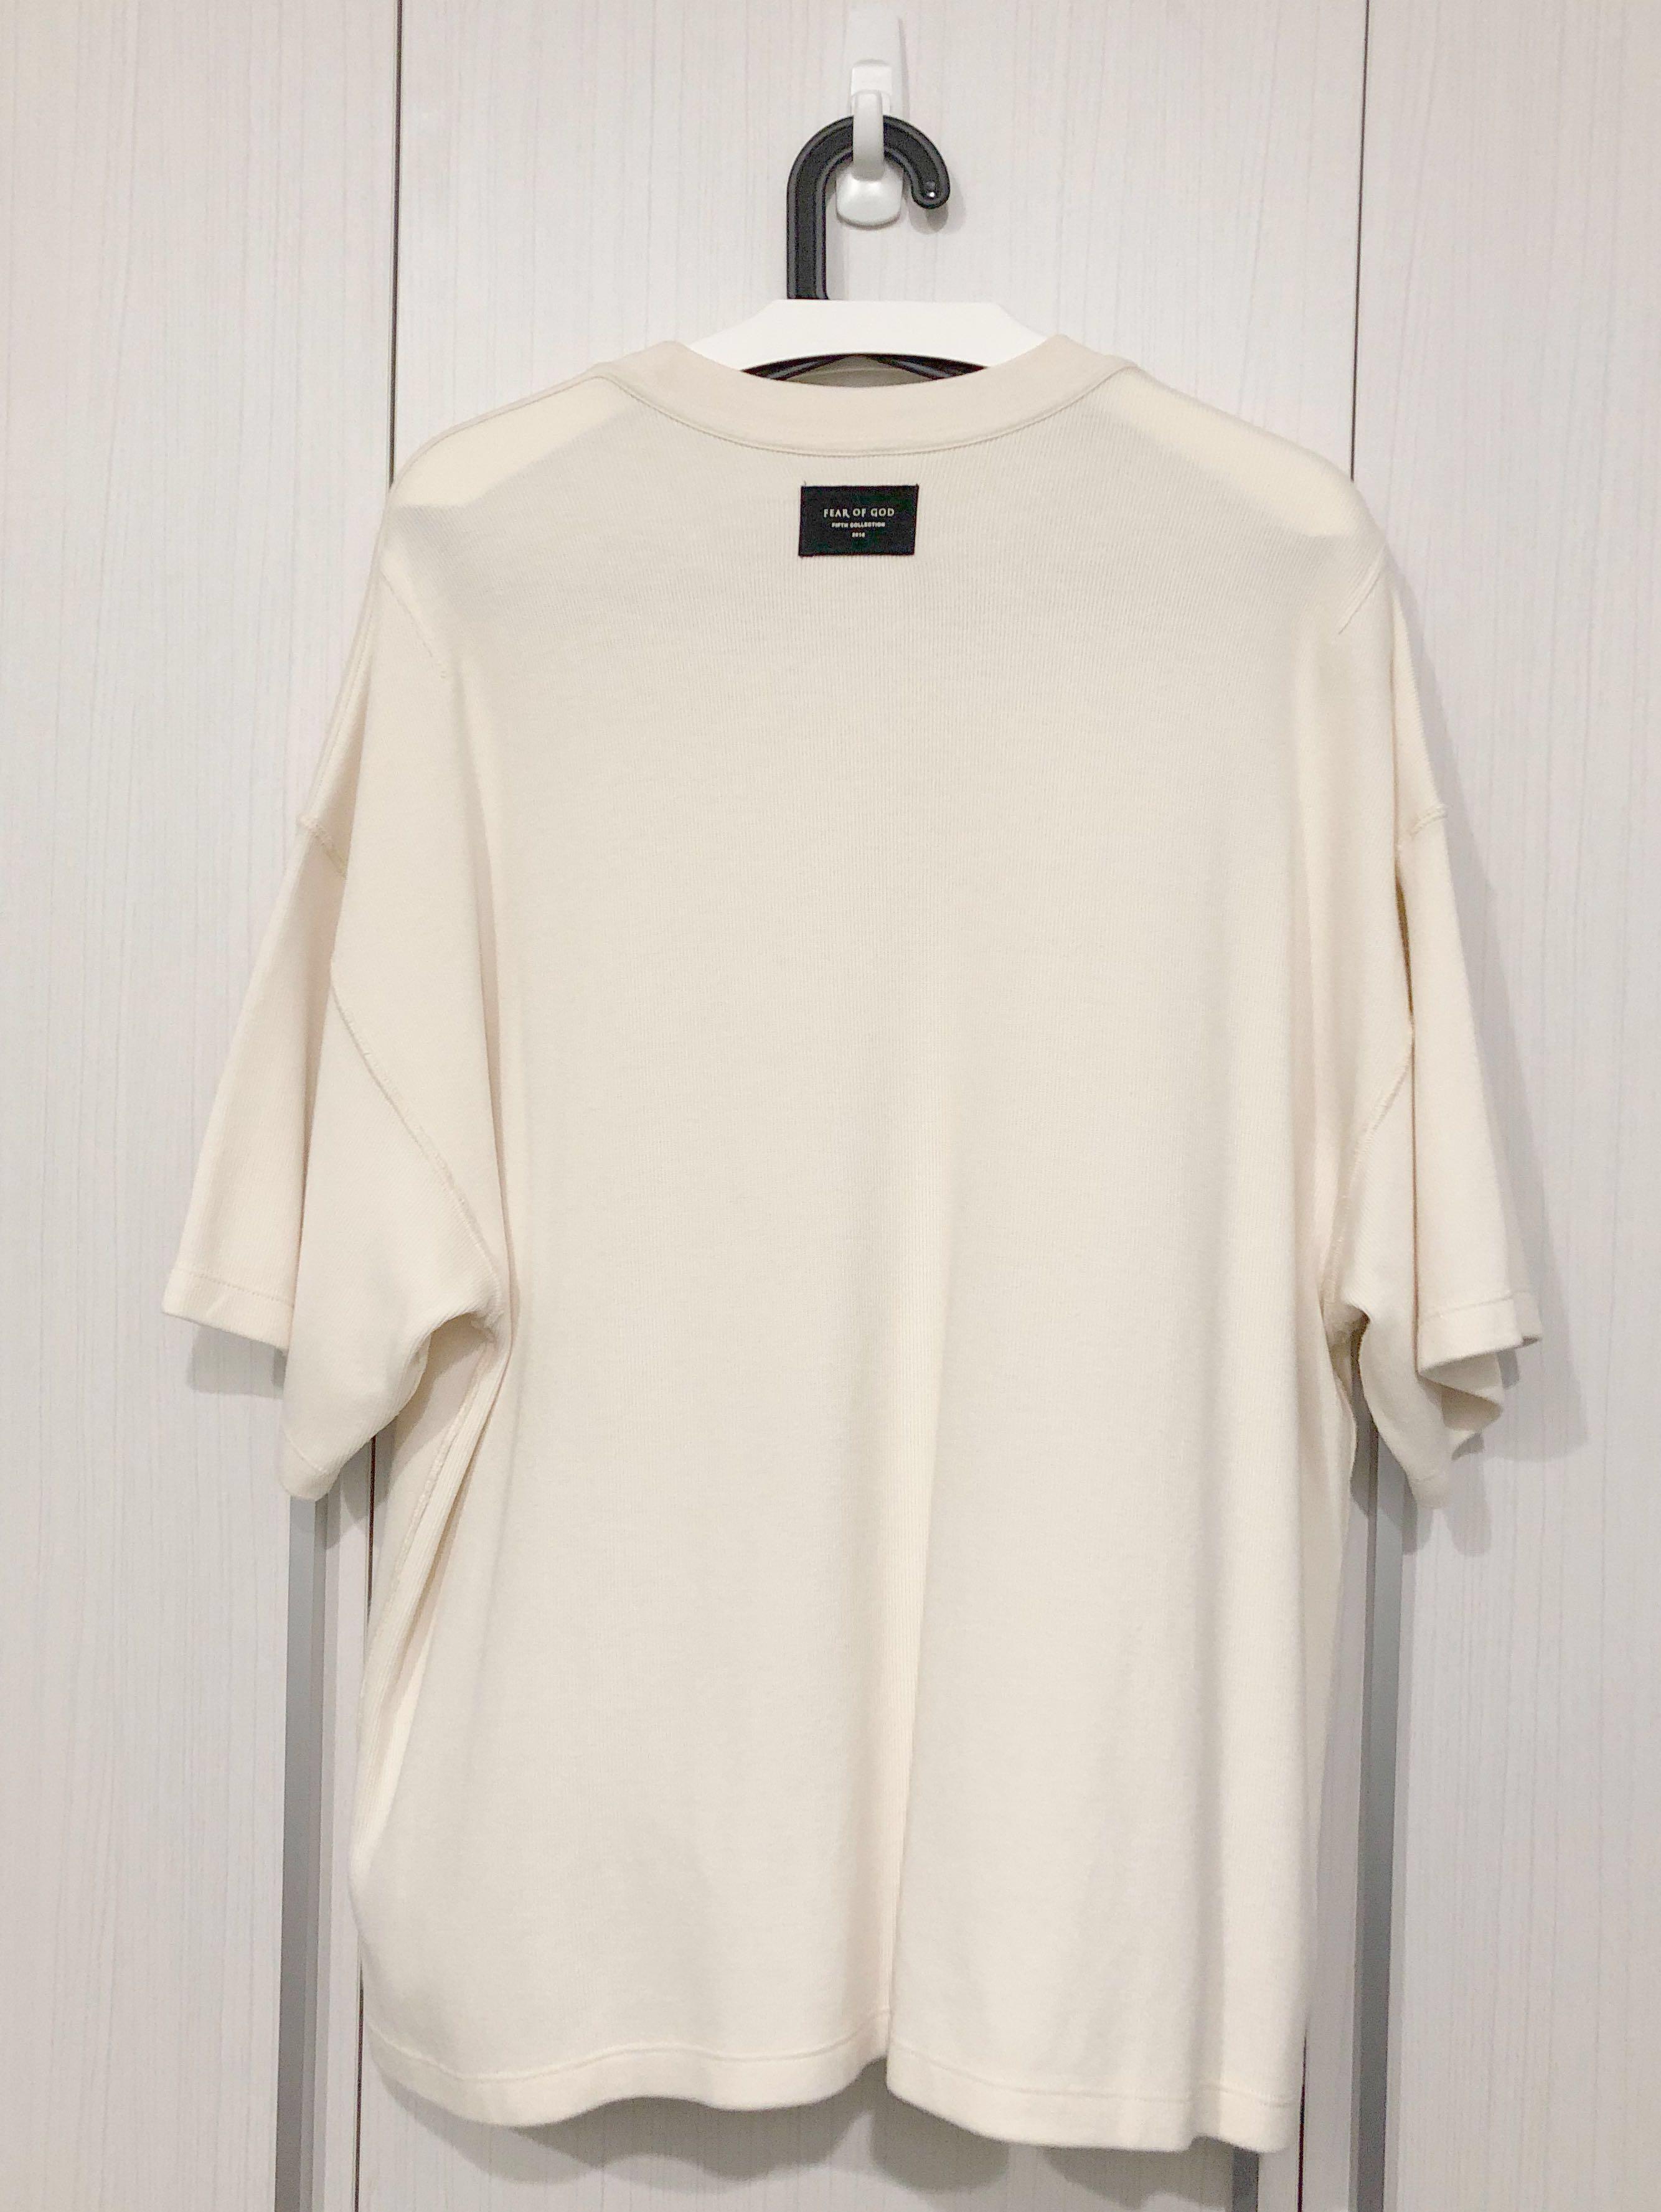 FEAR OF GOD  5th inside out  Tee  XLメンズ